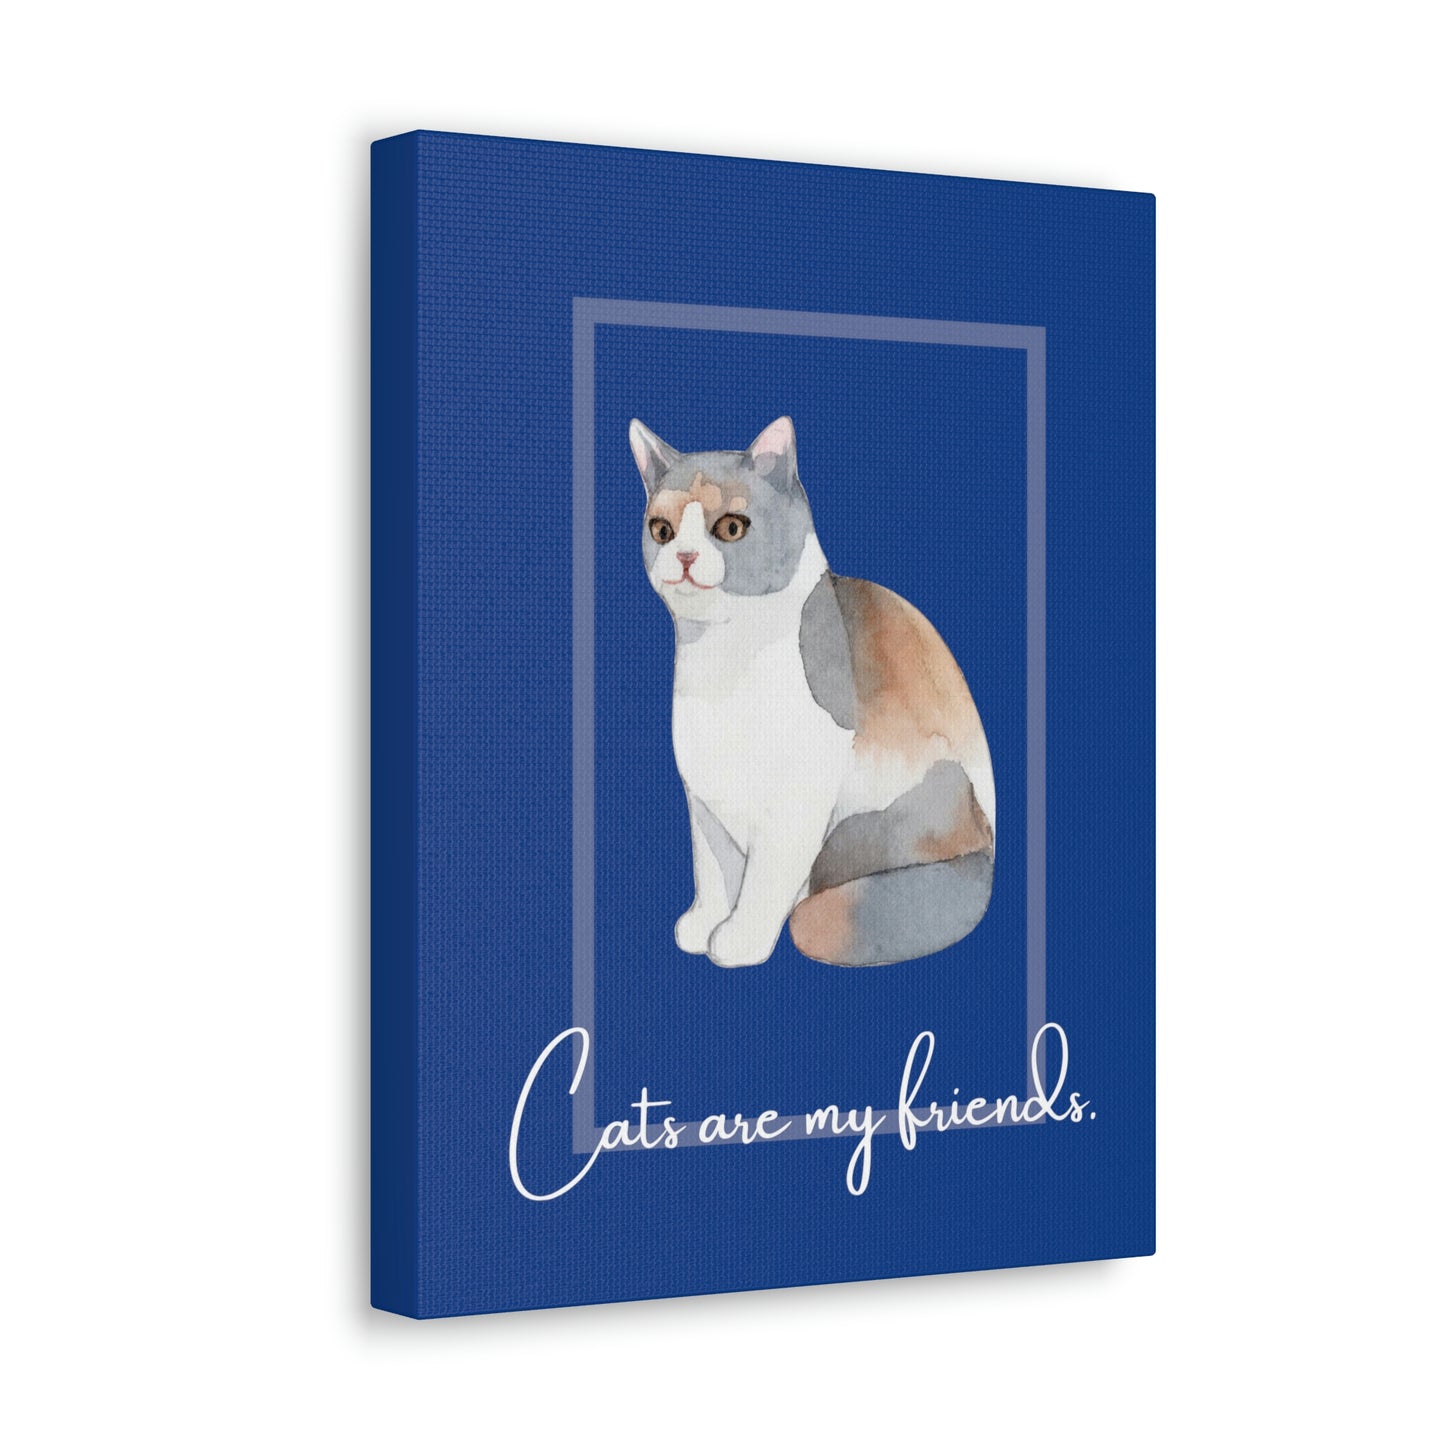 Cats are my friends. design (Dark Blue) Canvas Gallery Wraps poster